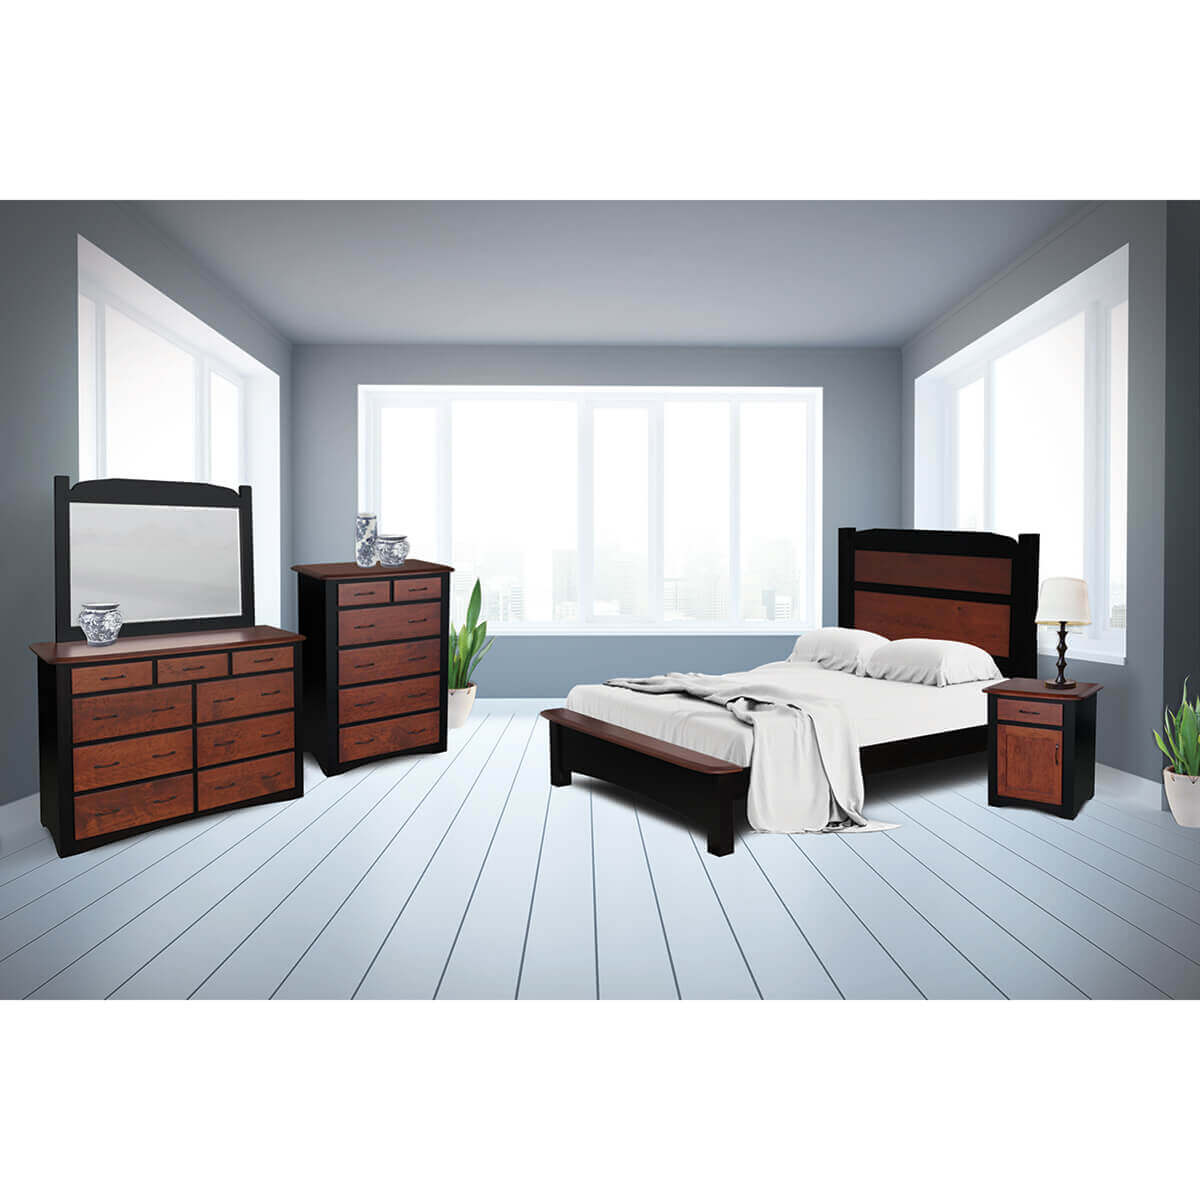 RichfieldBedroomCollection127109